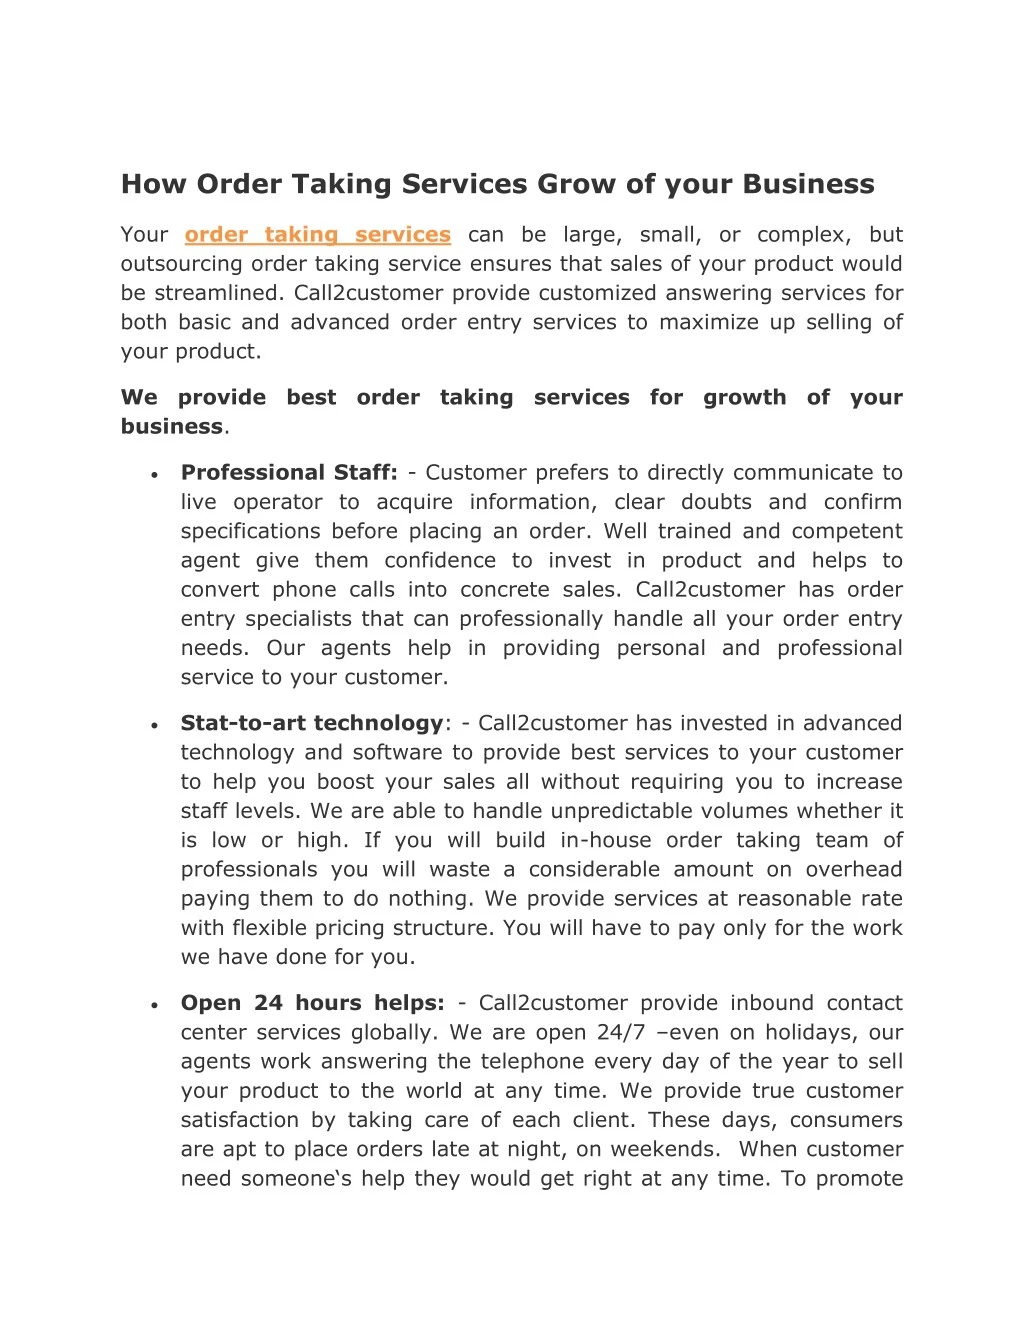 how order taking services grow of your business